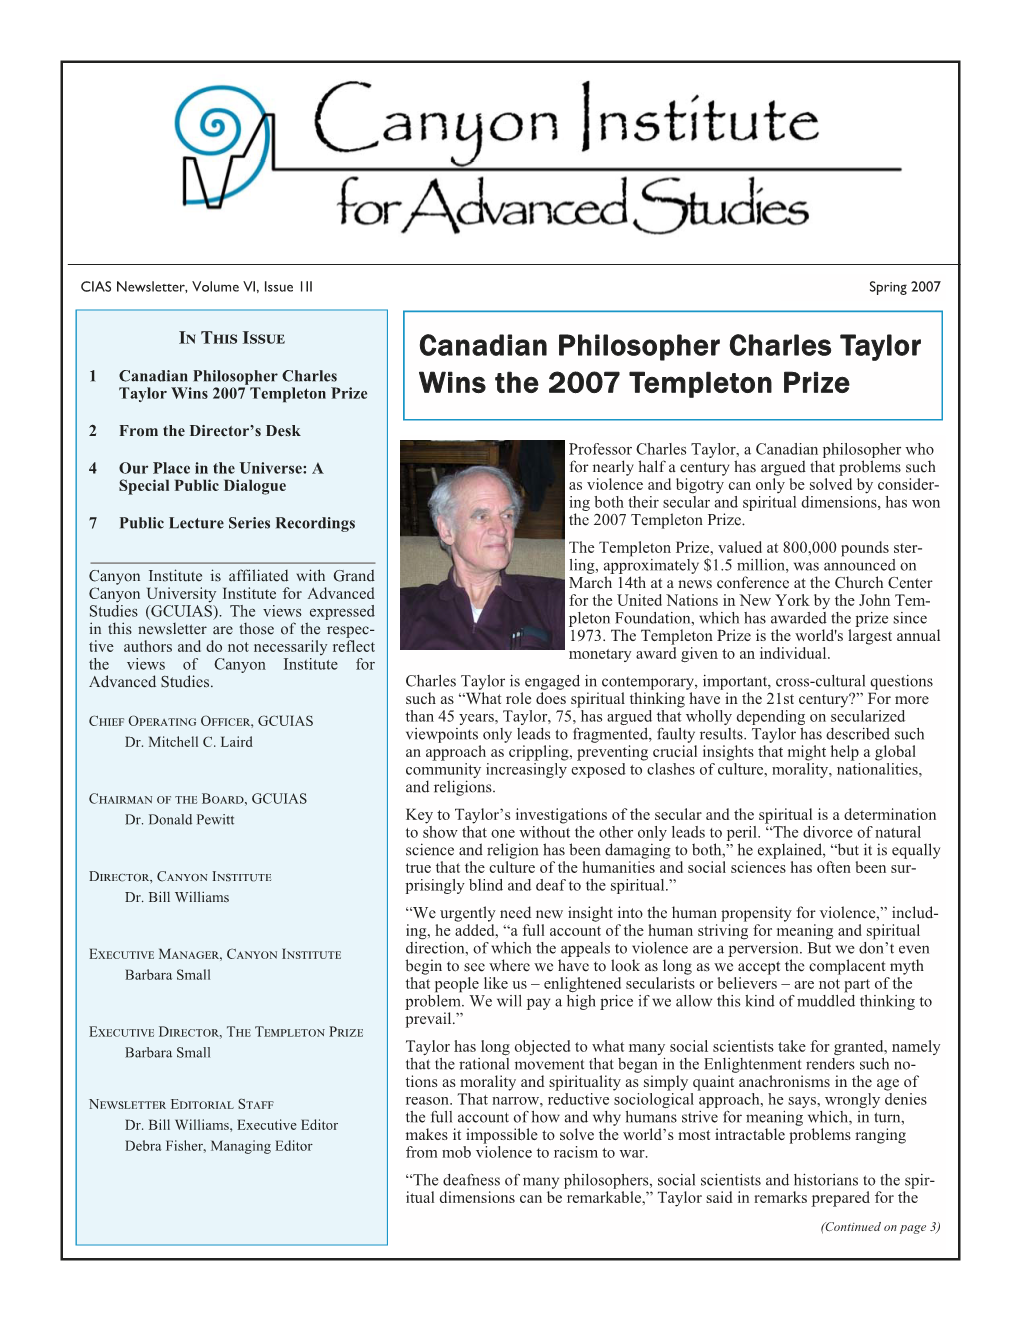 Canadian Philosopher Charles Taylor Wins the 2007 Templeton Prize